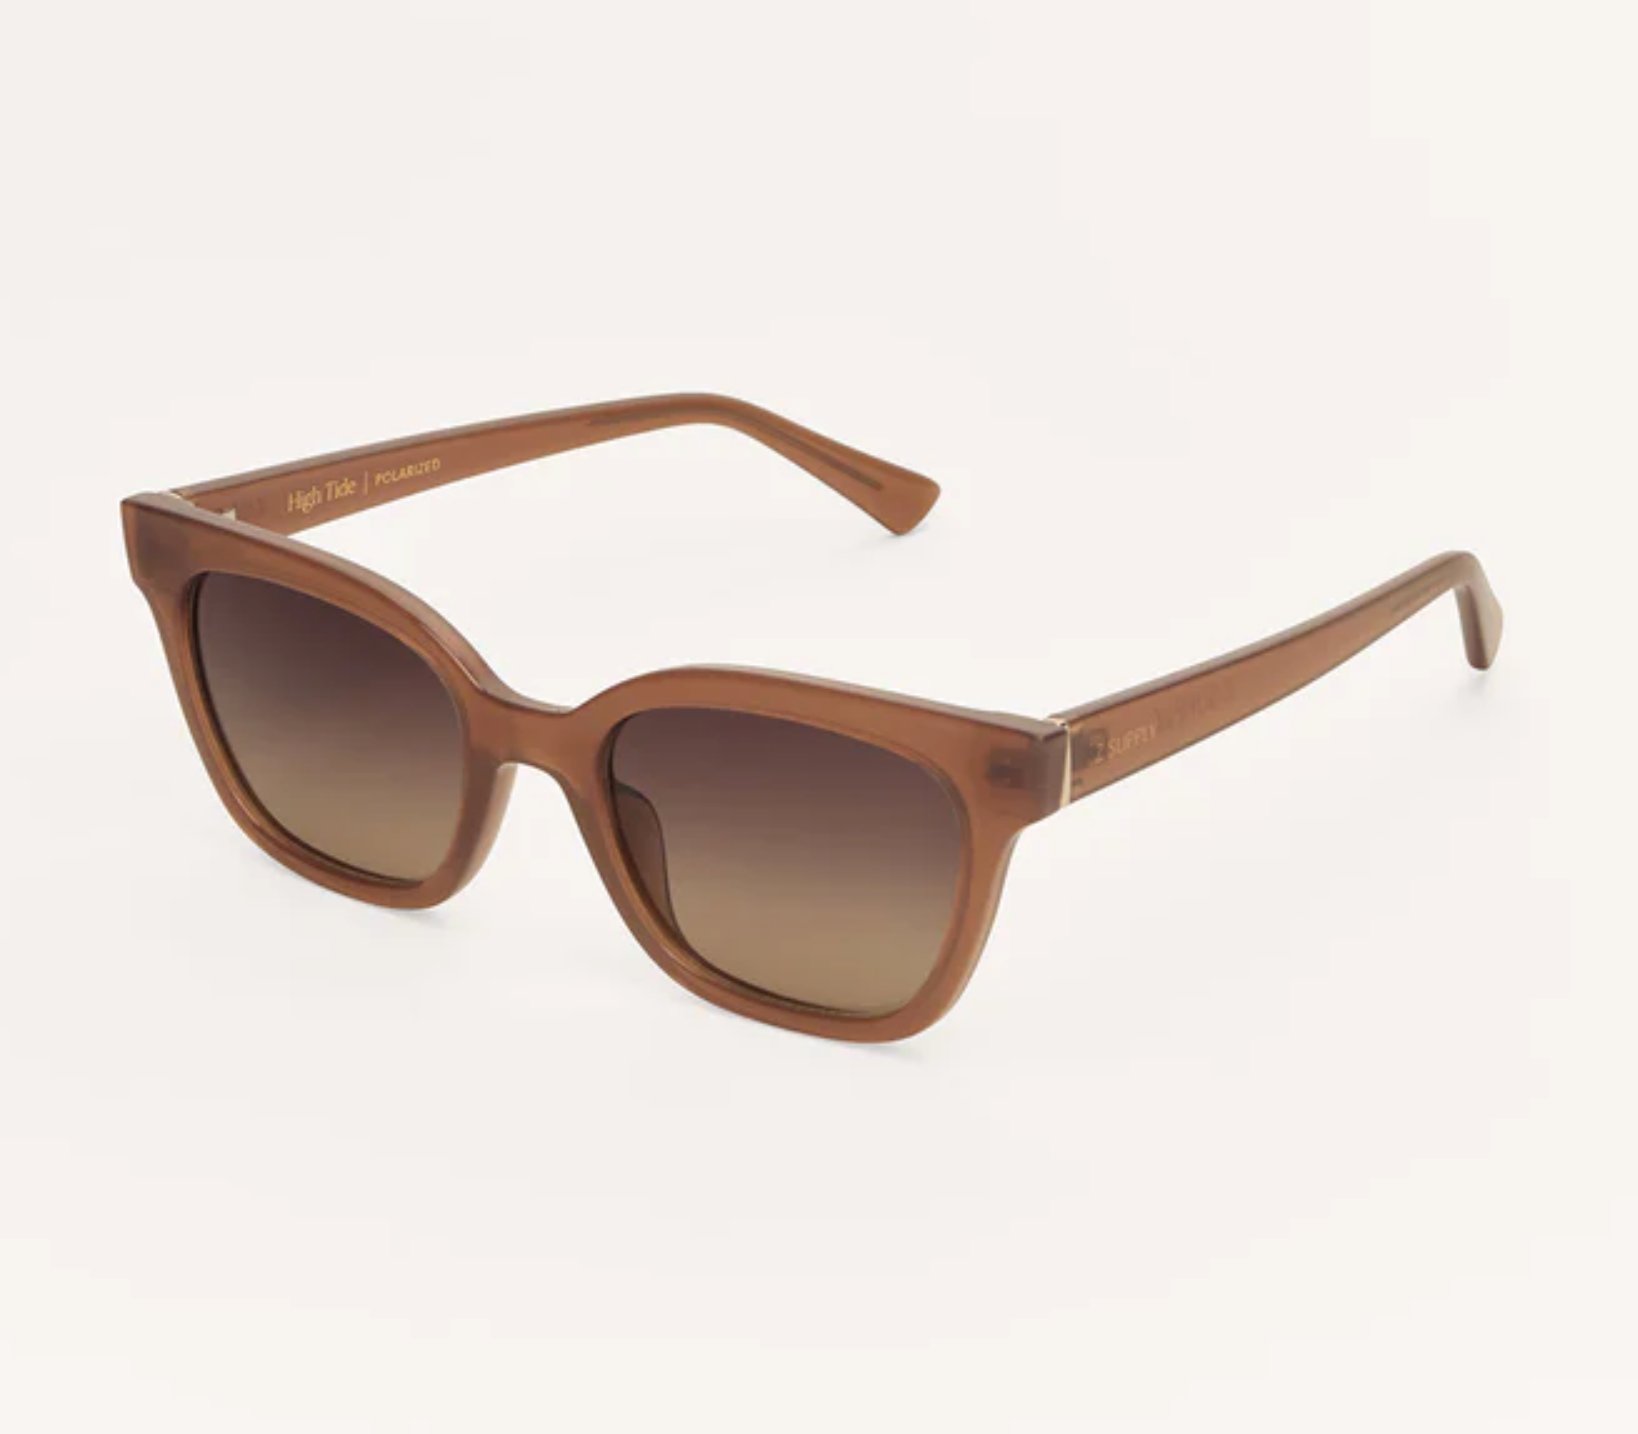 High Tide Sunglasses by Z Supply, Taupe